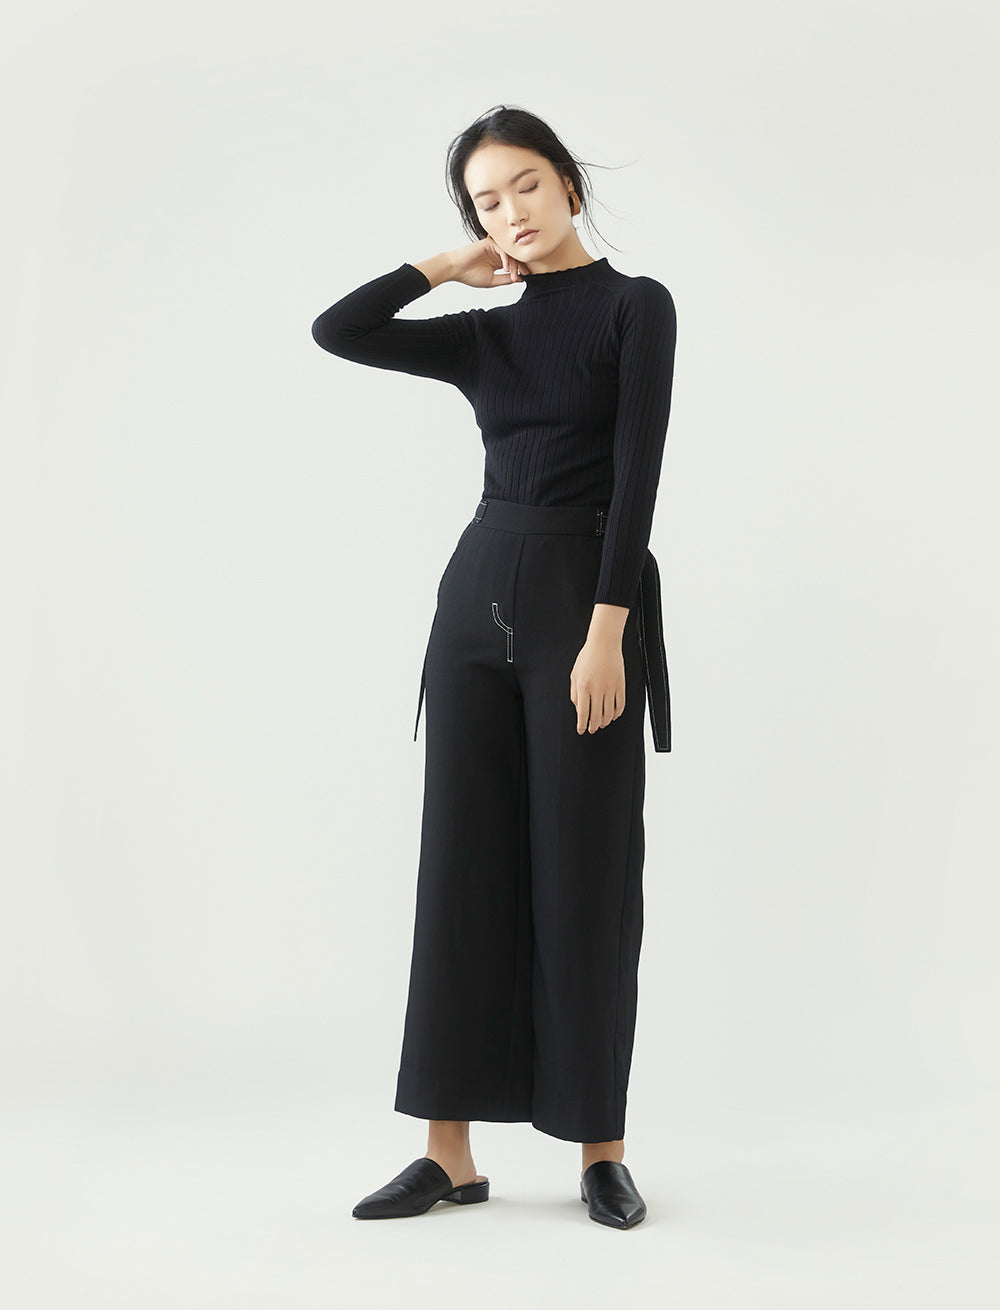 r y e  Modest Women Ribbed Knit Long Sleeve Top in Black with ribbed details and high neck collar made from 95% Viscose and 5% Spandex full length view